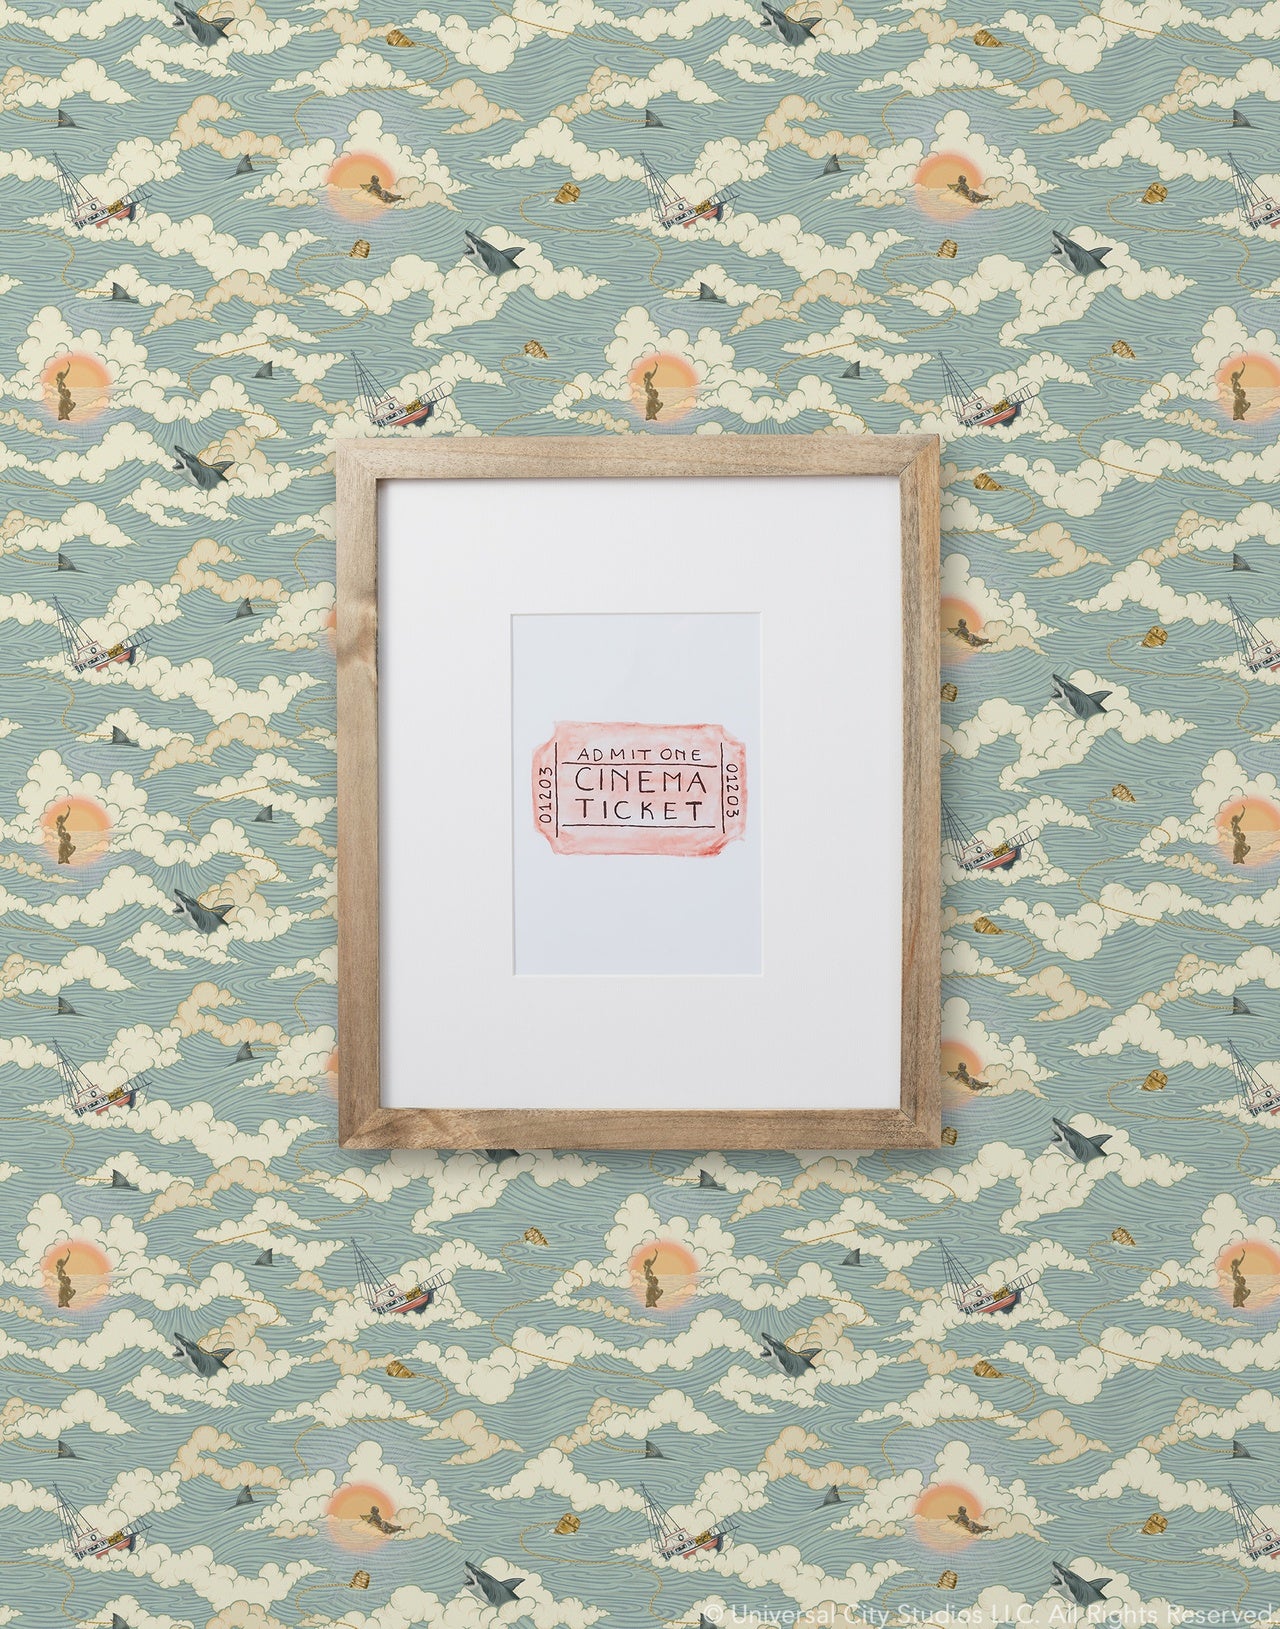 Amity Sunset pattern inspired by the film Jaws and designed by Lisel Jane Ashlock | Universal + Hygge & West wallpaper and shower curtain collection